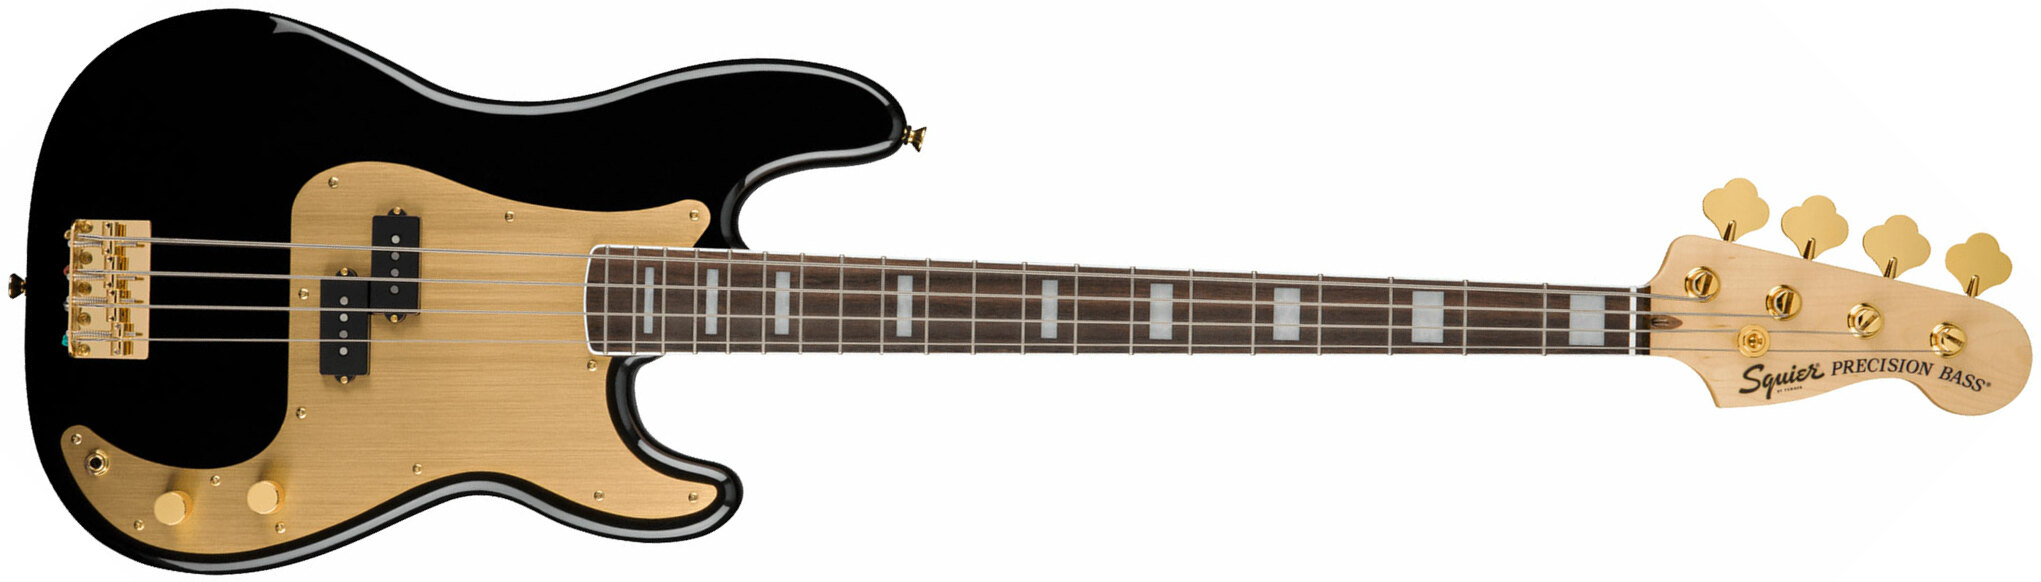 Squier Precision Bass 40th Anniversary Gold Edition Lau - Black - Solid body electric bass - Main picture